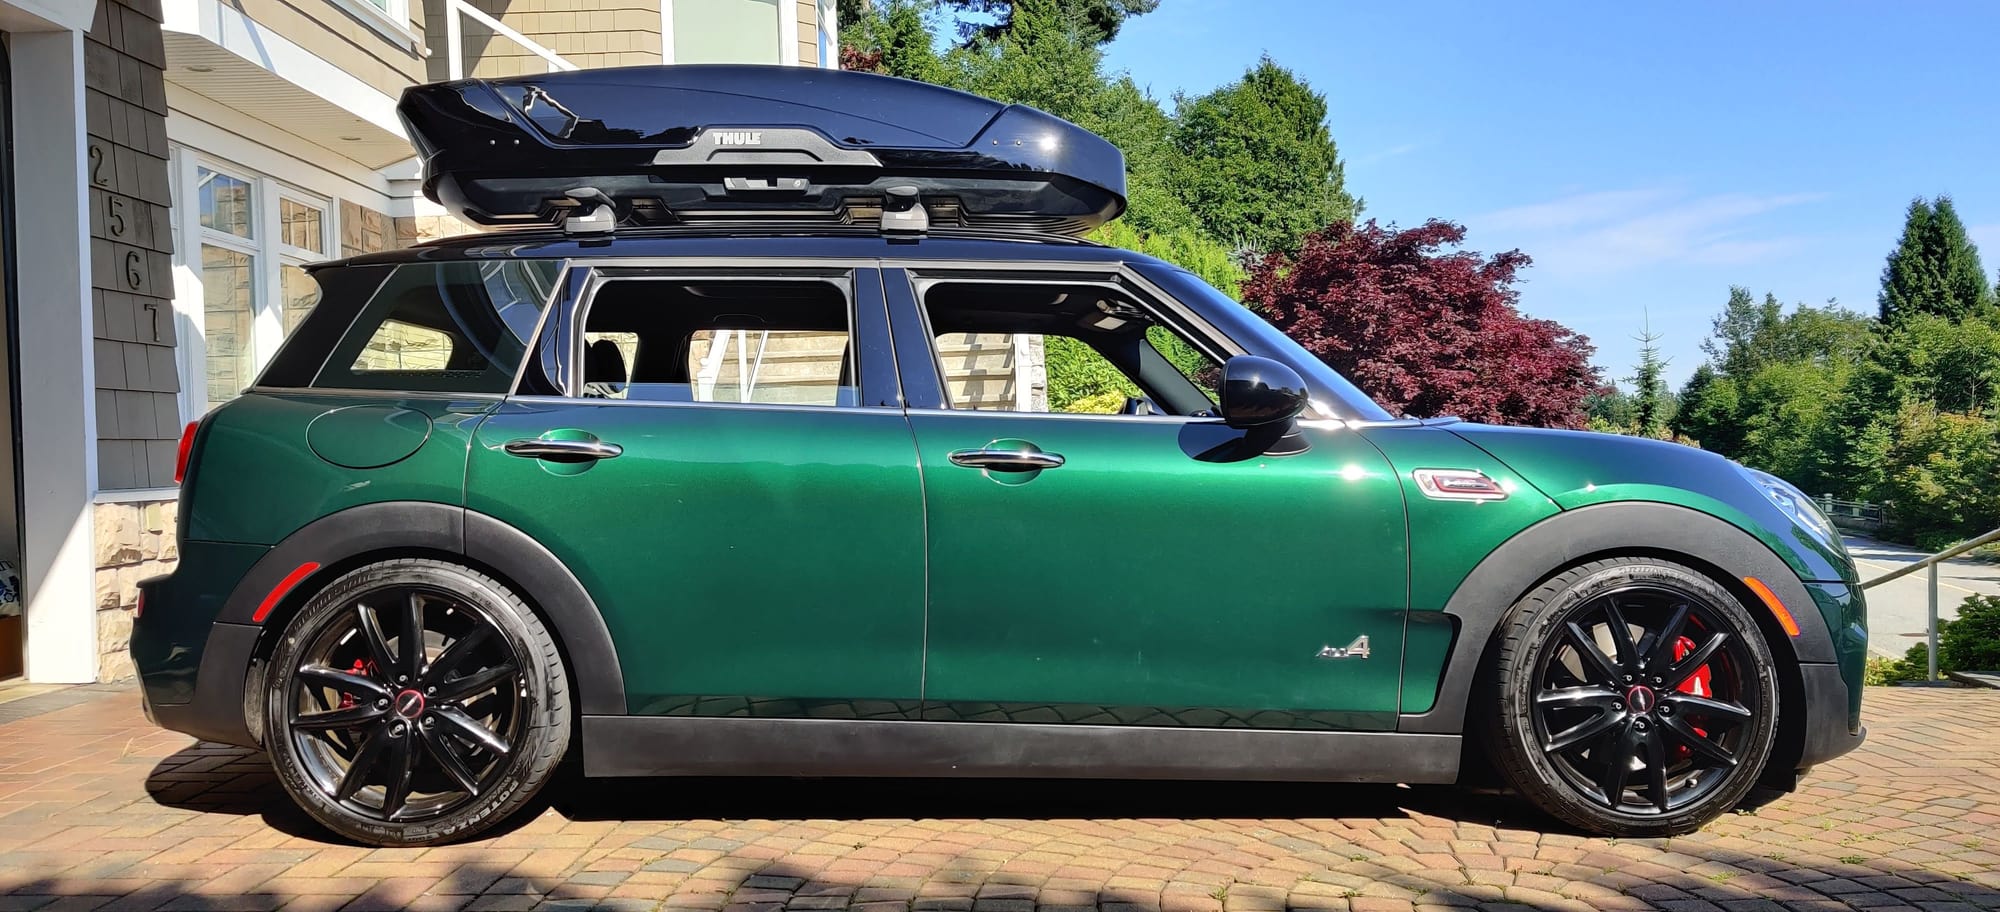 F54 Rooftop Box for storage - North American Motoring